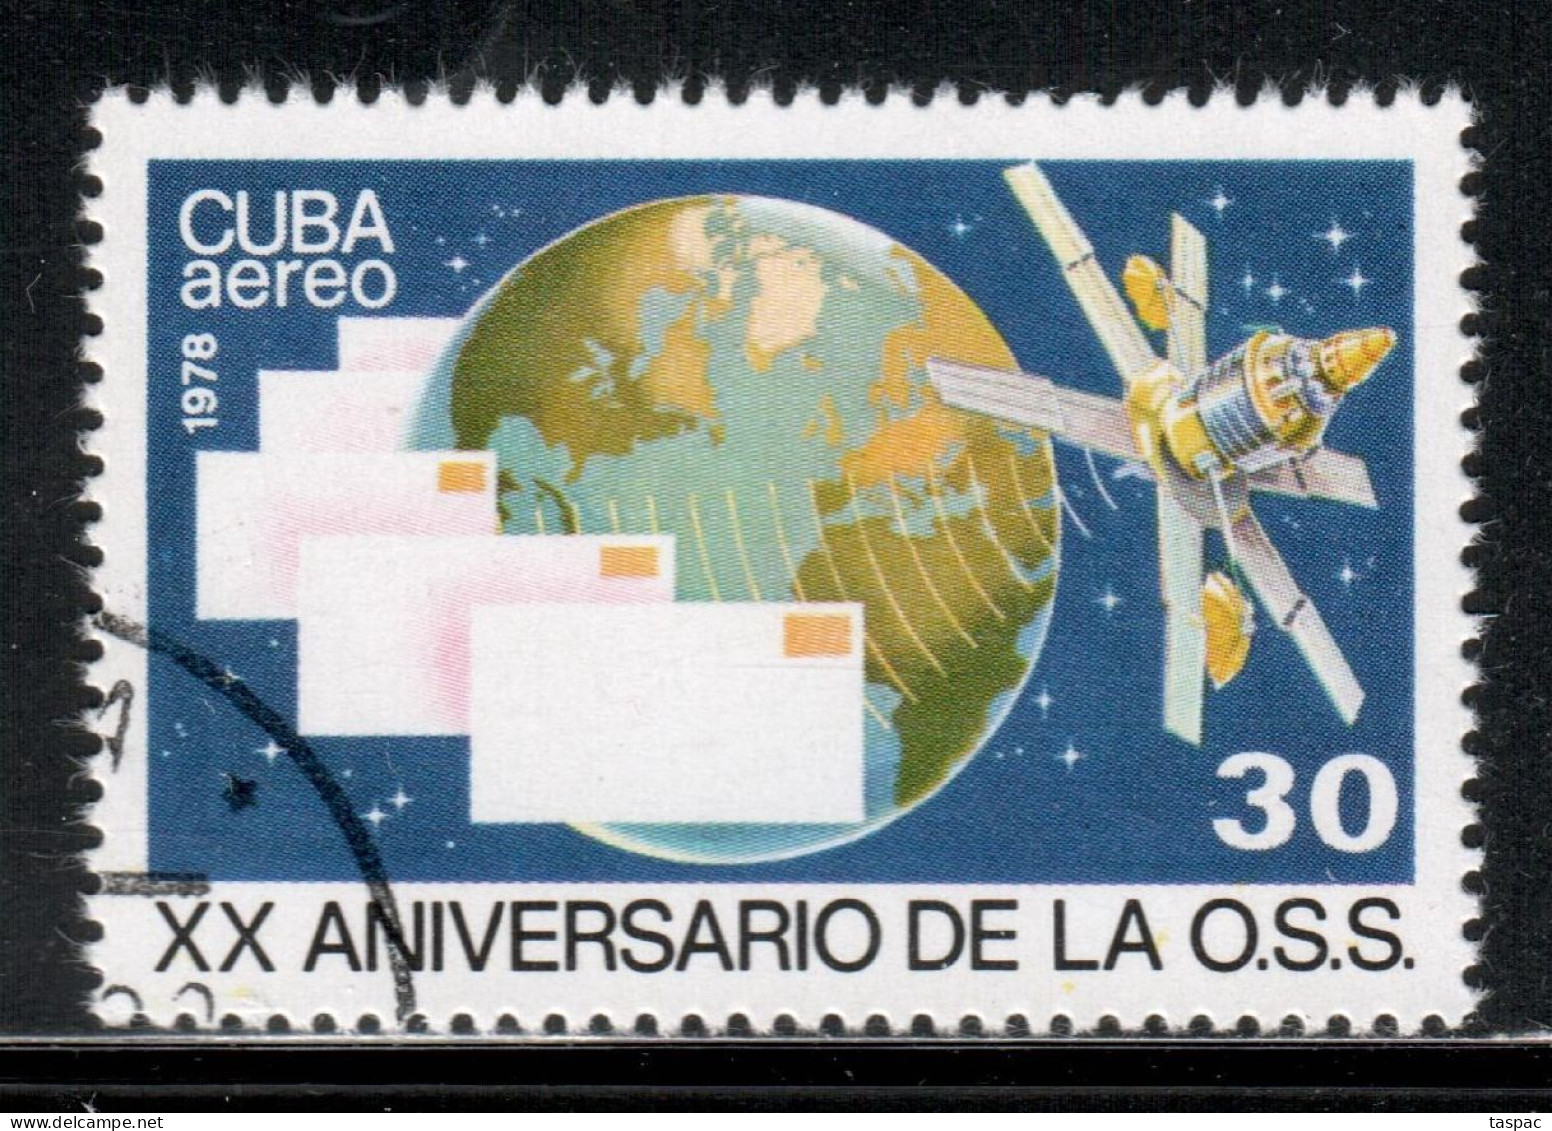 Cuba 1978 Mi# 2344 Used - Socialist Communication Organizations Congress (OSS), 20th Anniv. / Space - Used Stamps